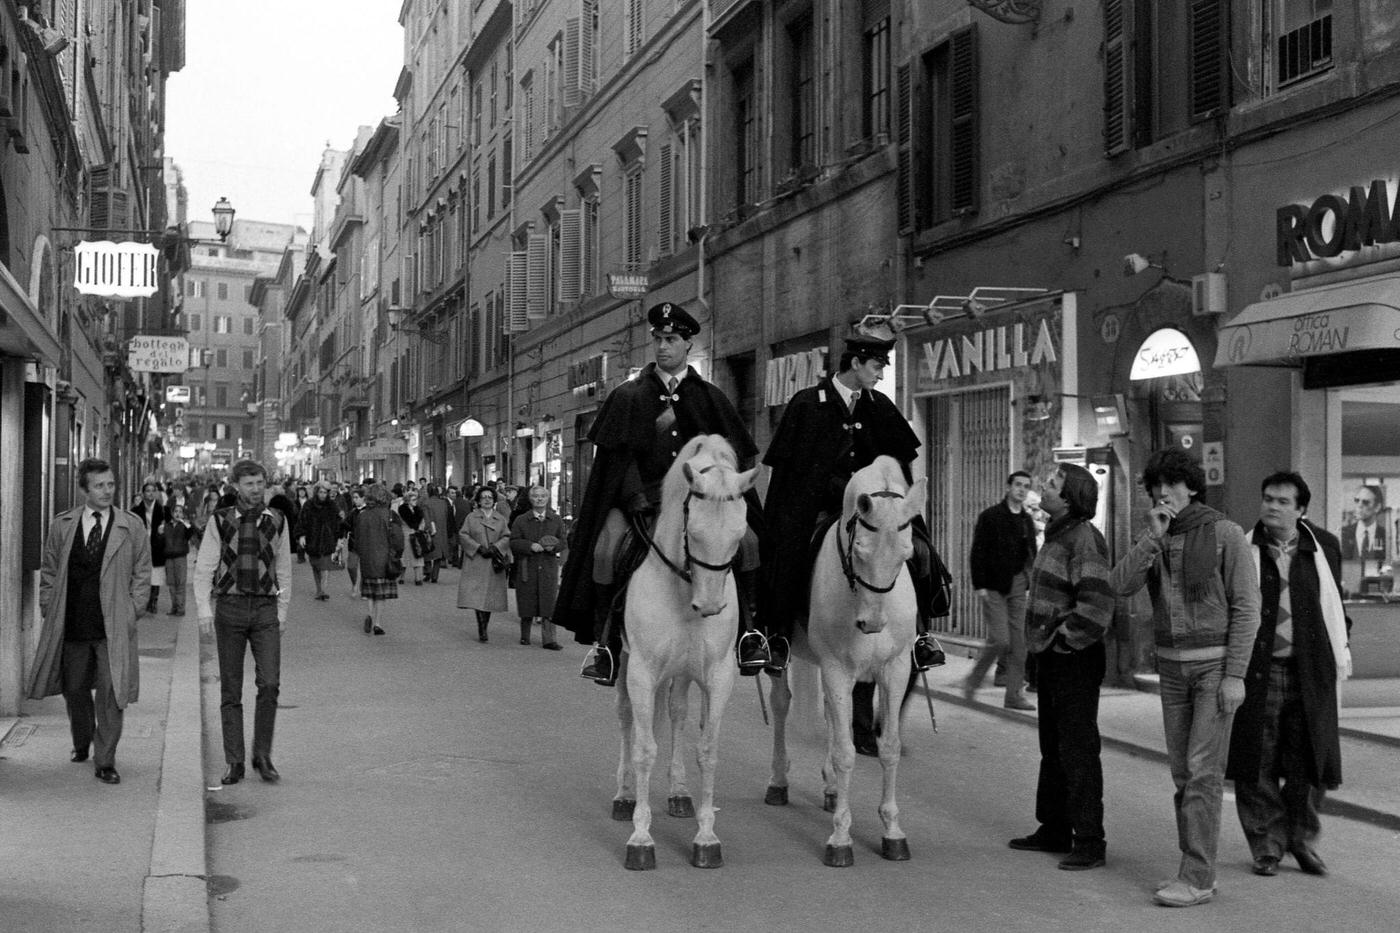 Mounted Police Officers on Via Frattina in Rome, 1985